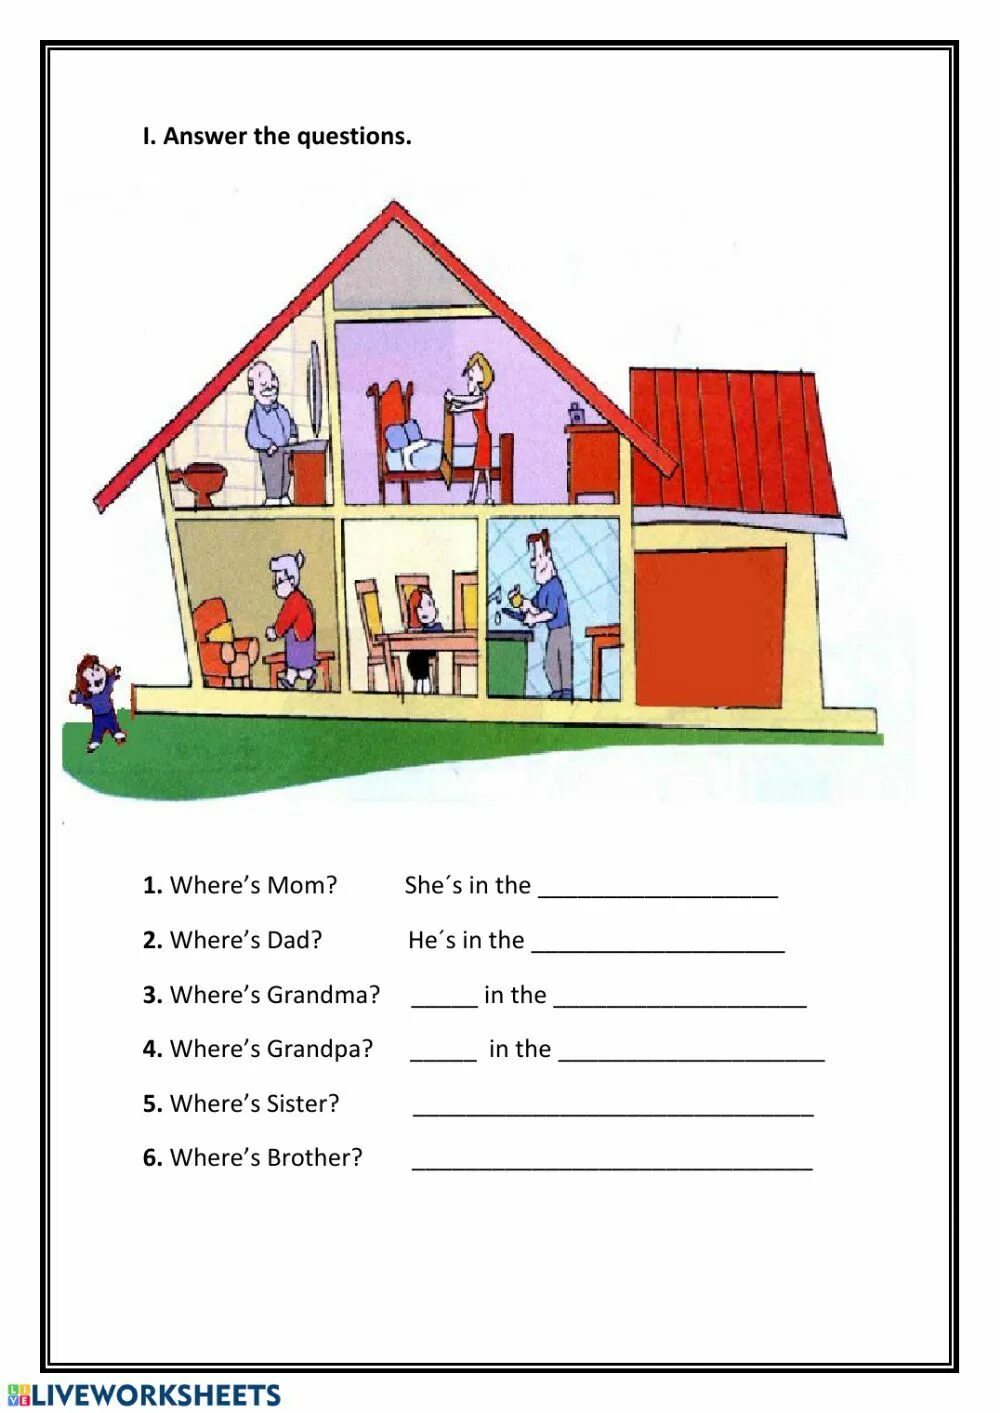 Where s she from. Дом Worksheets. Дом Worksheets for Kids. My Home задания. At Home задания.